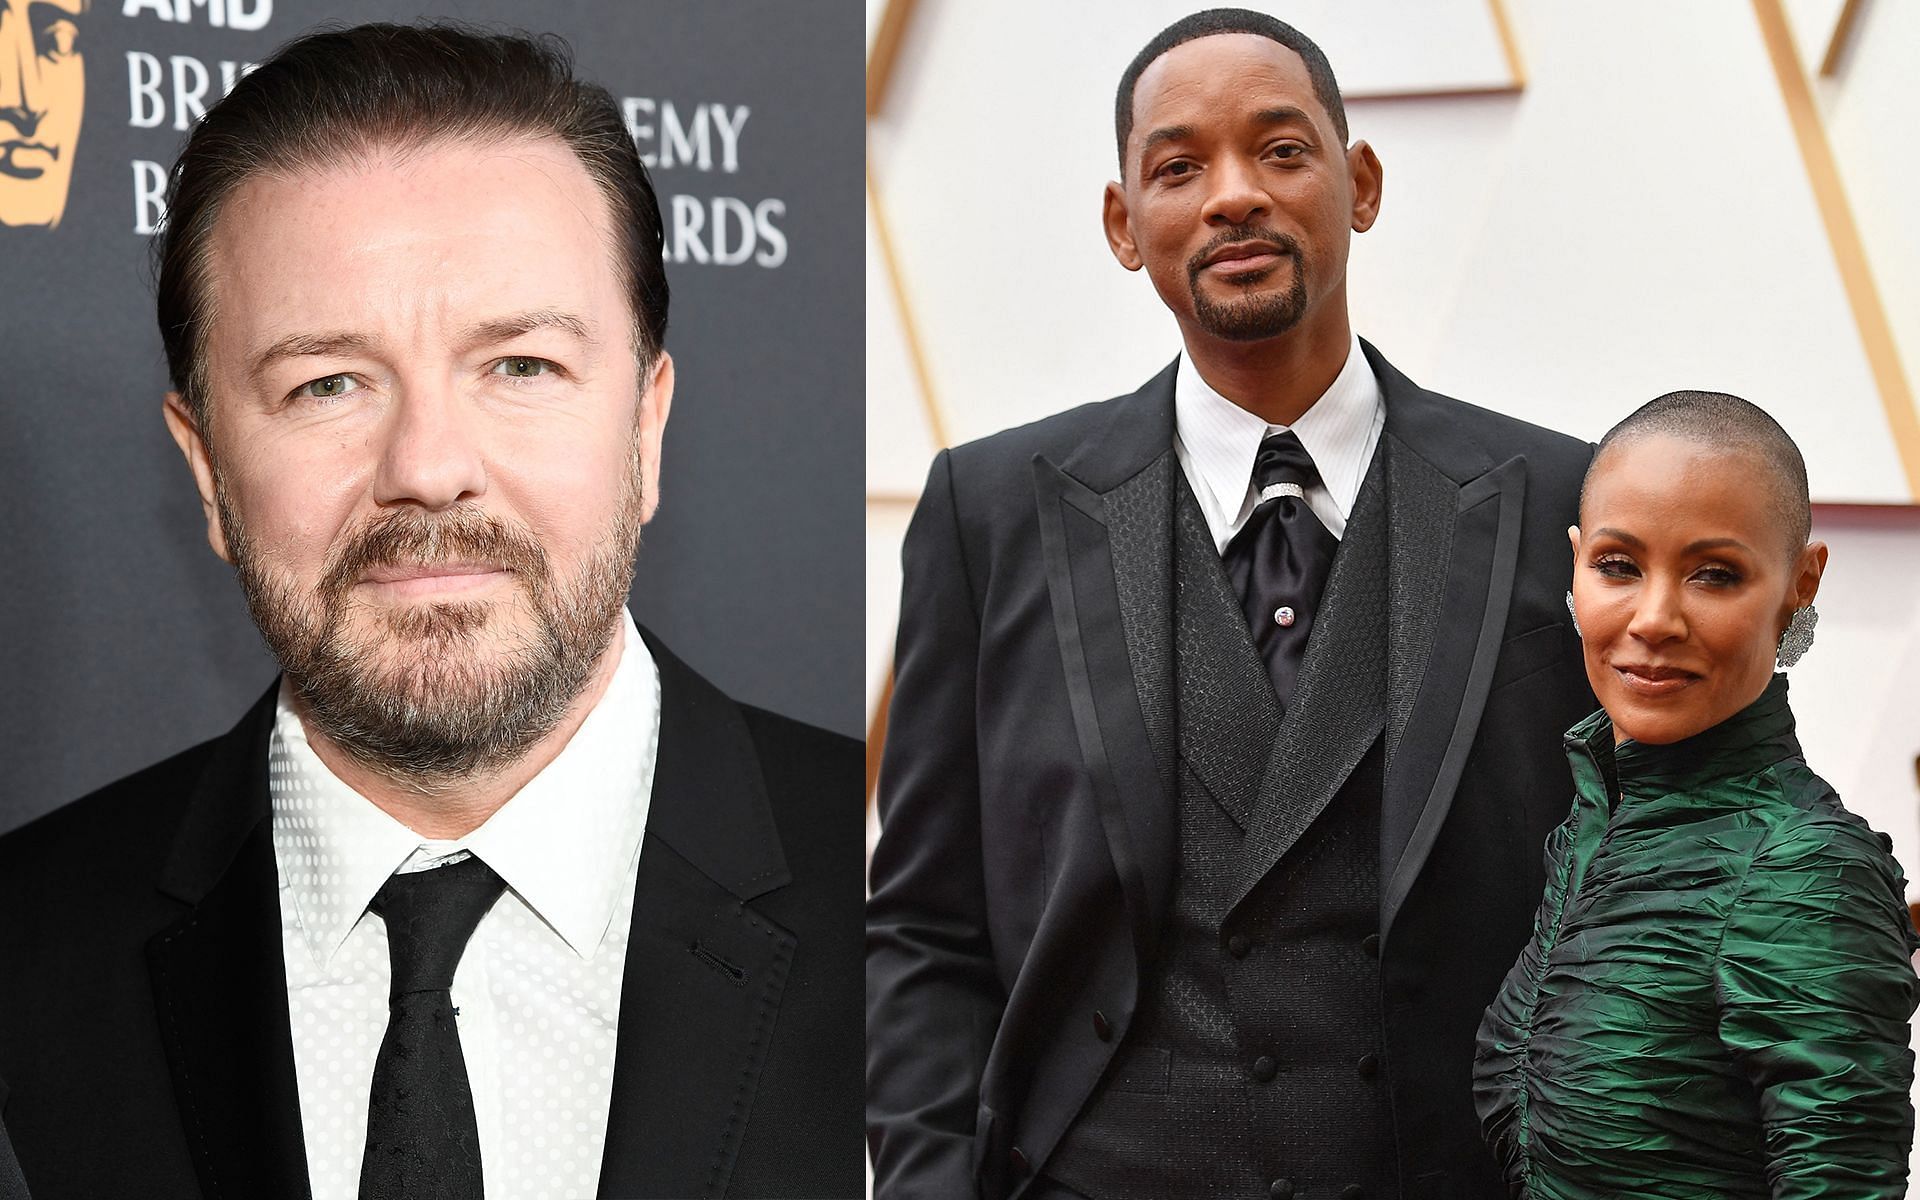 Ricky Gervais responded to the Will Smith controversy (Image via IMDb and BBC)